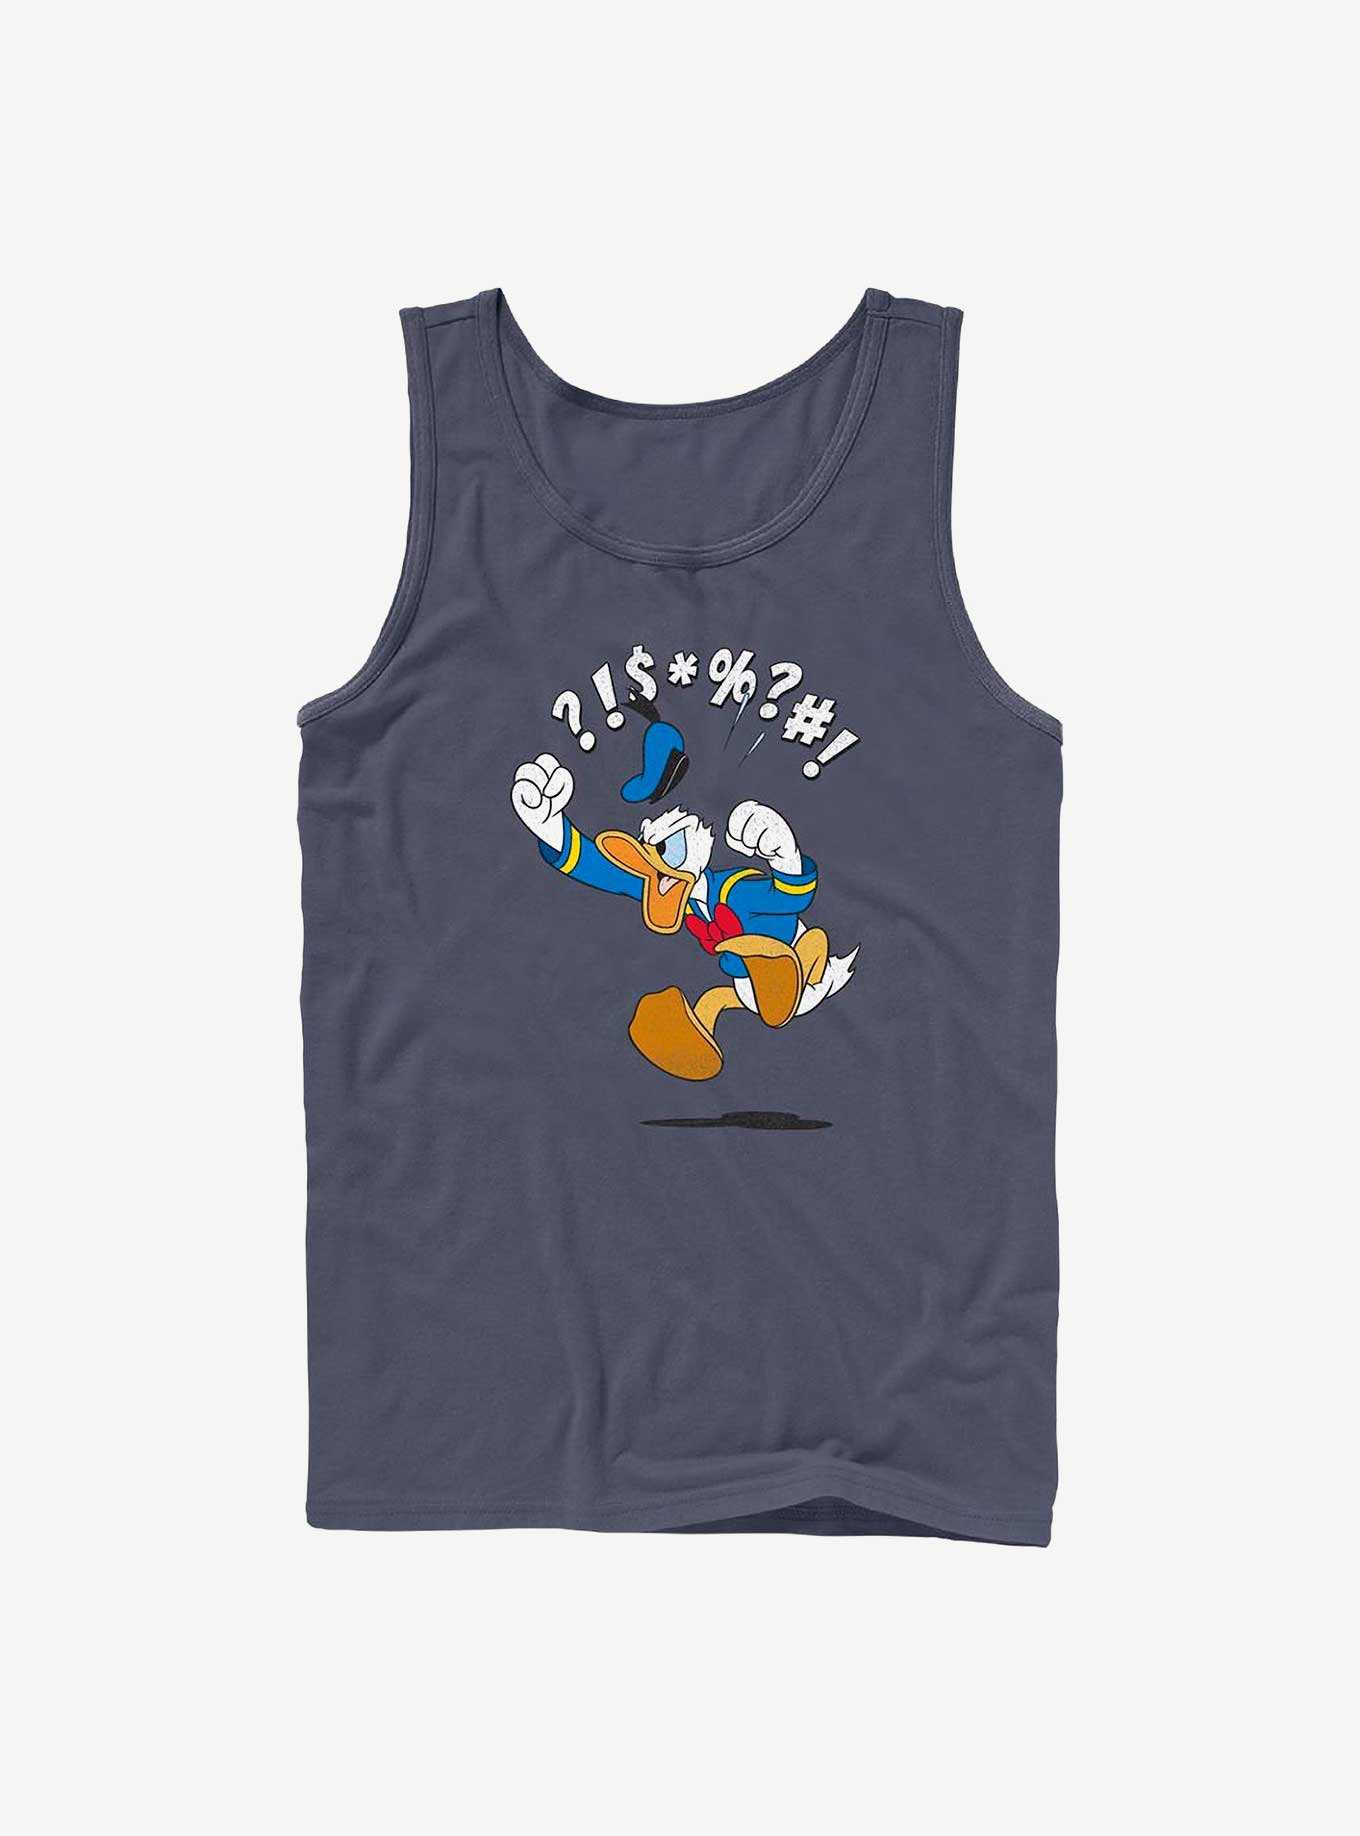 Two Amazing New Men's Tank Tops Land at Disney Springs